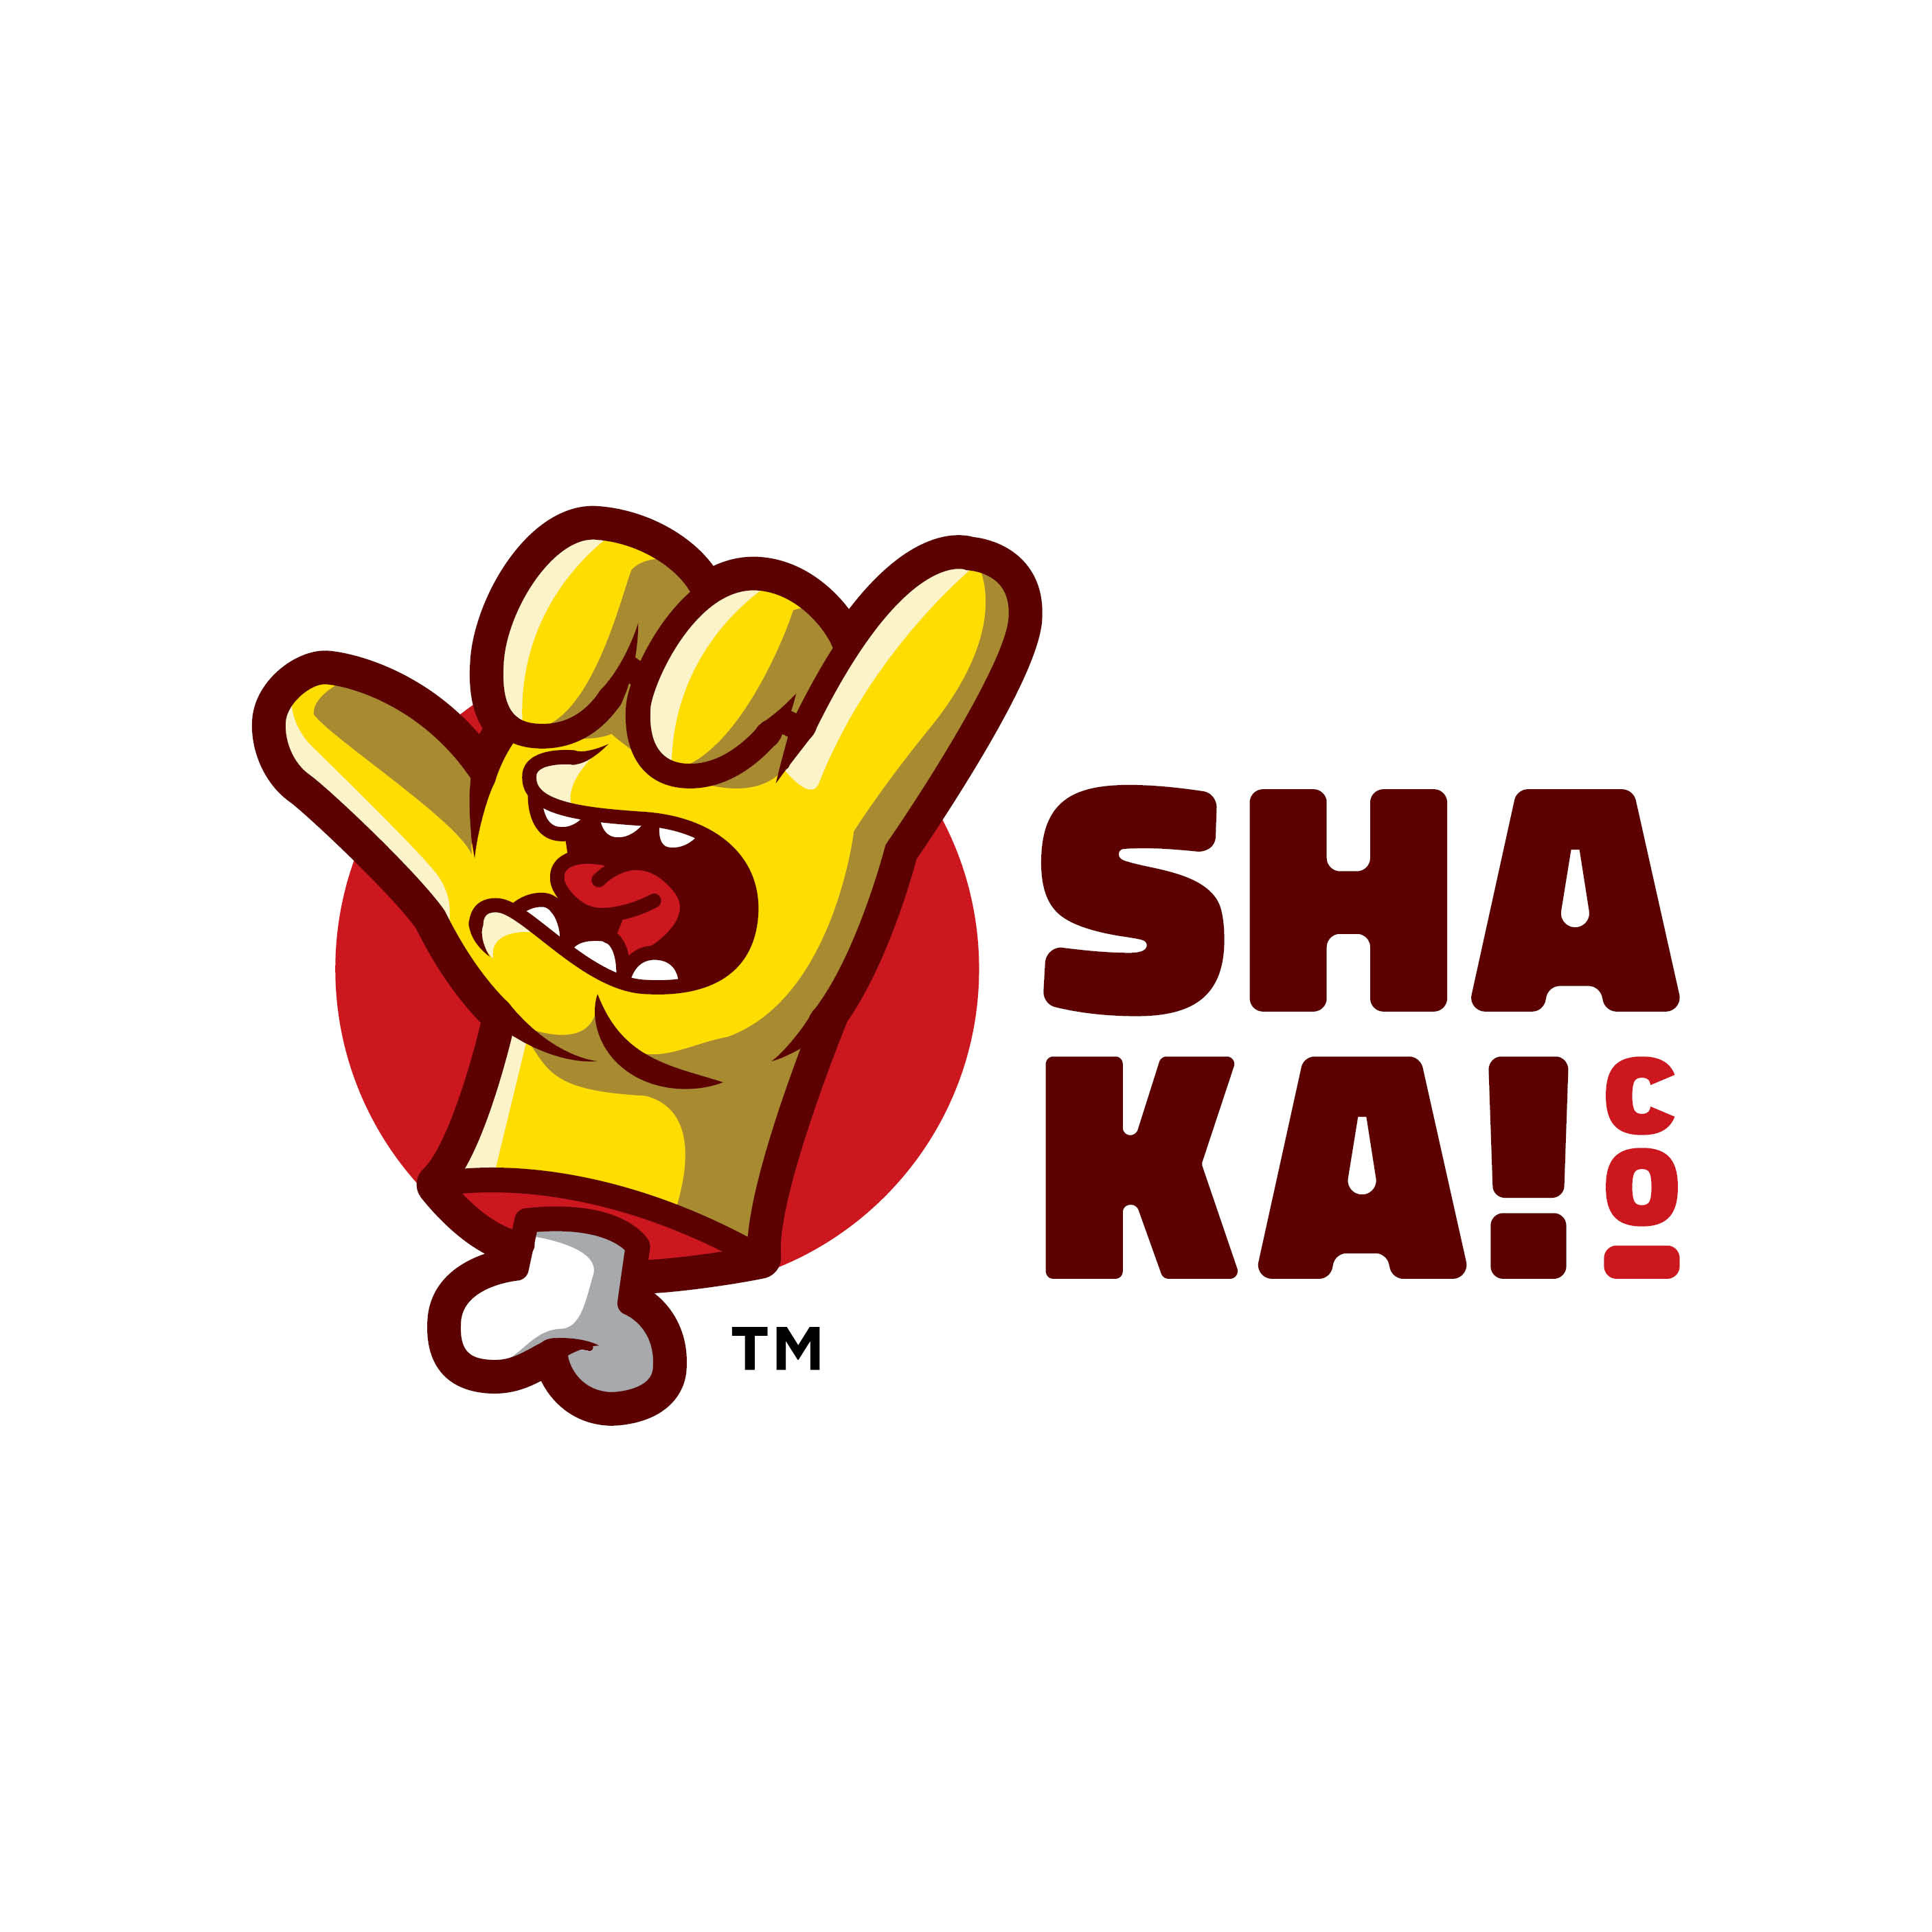 SHAKA logo design by logo designer Duffy Design Co for your inspiration and for the worlds largest logo competition